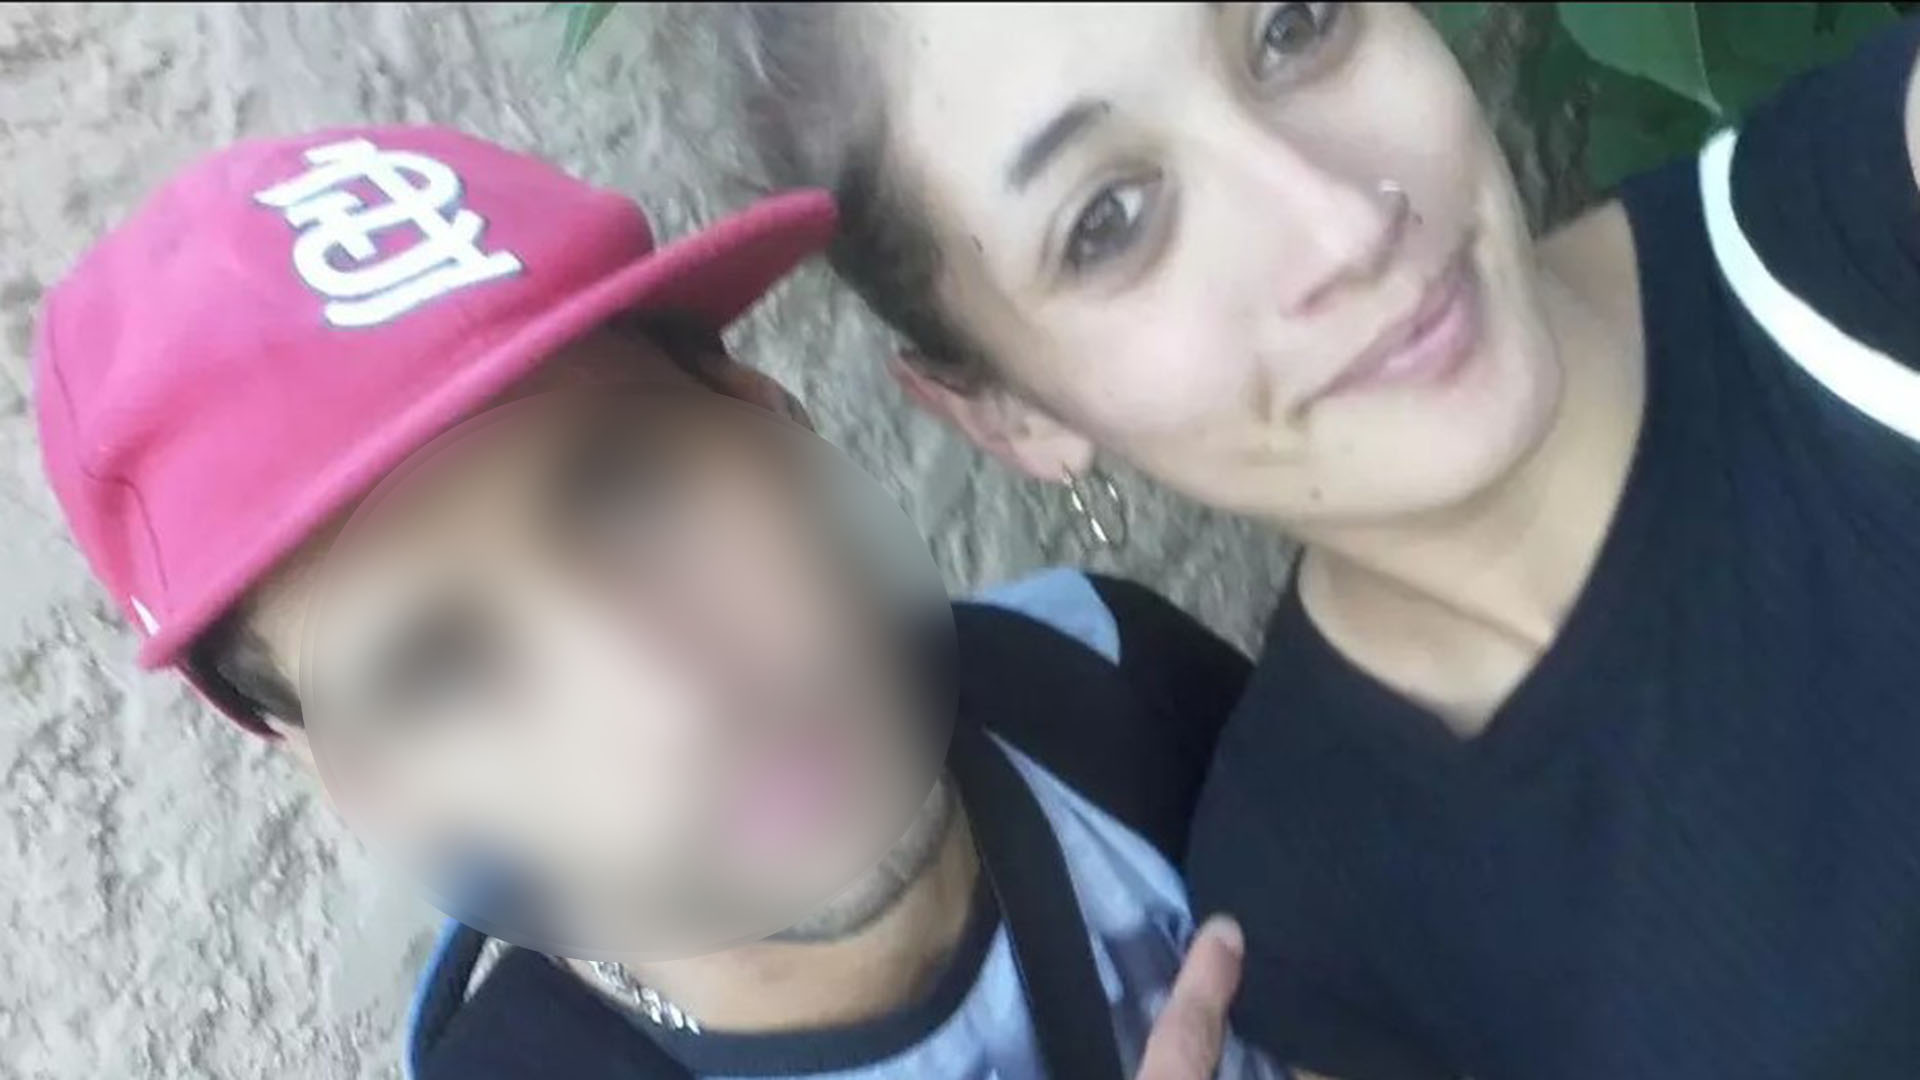 María Eugenia Montenegro was stabbed to death.  Her boyfriend was arrested for the murder